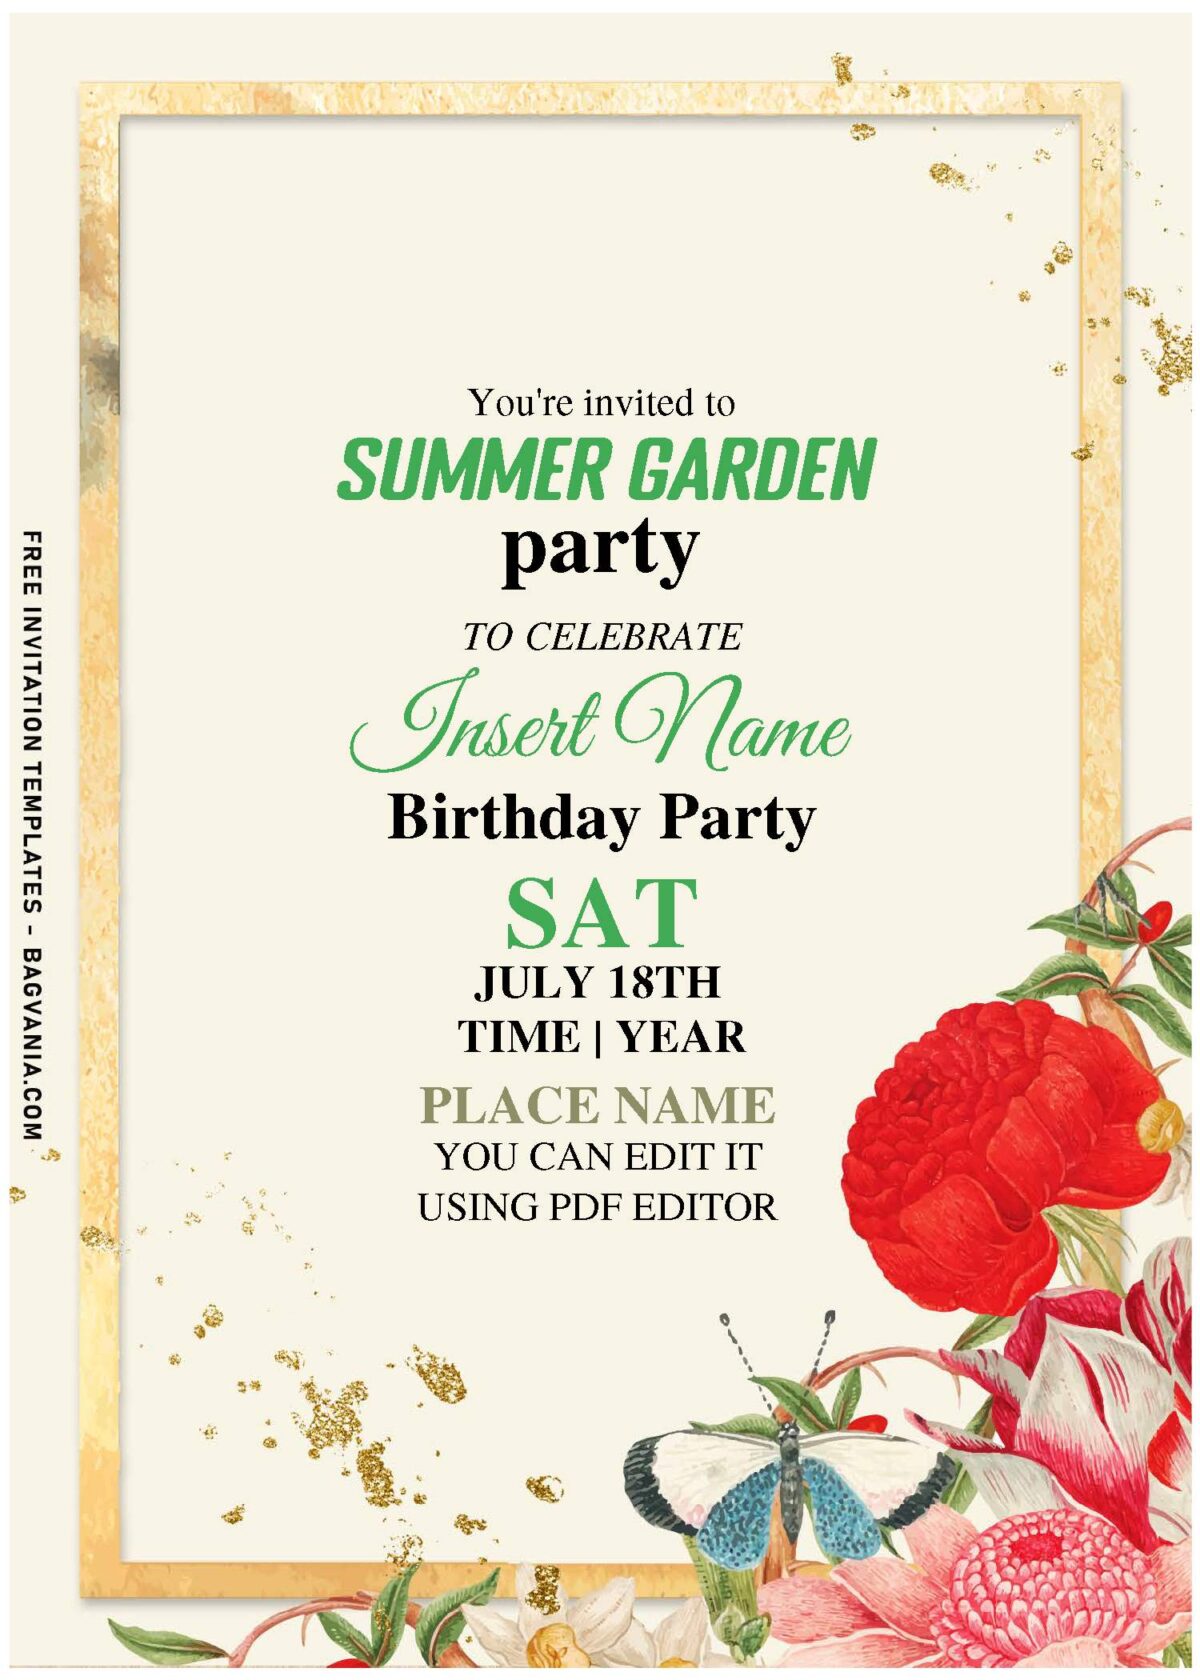 (Free Editable PDF) Dreamy Hand Drawn Flowers Garden Party Invitation Templates with rustic wooden frame